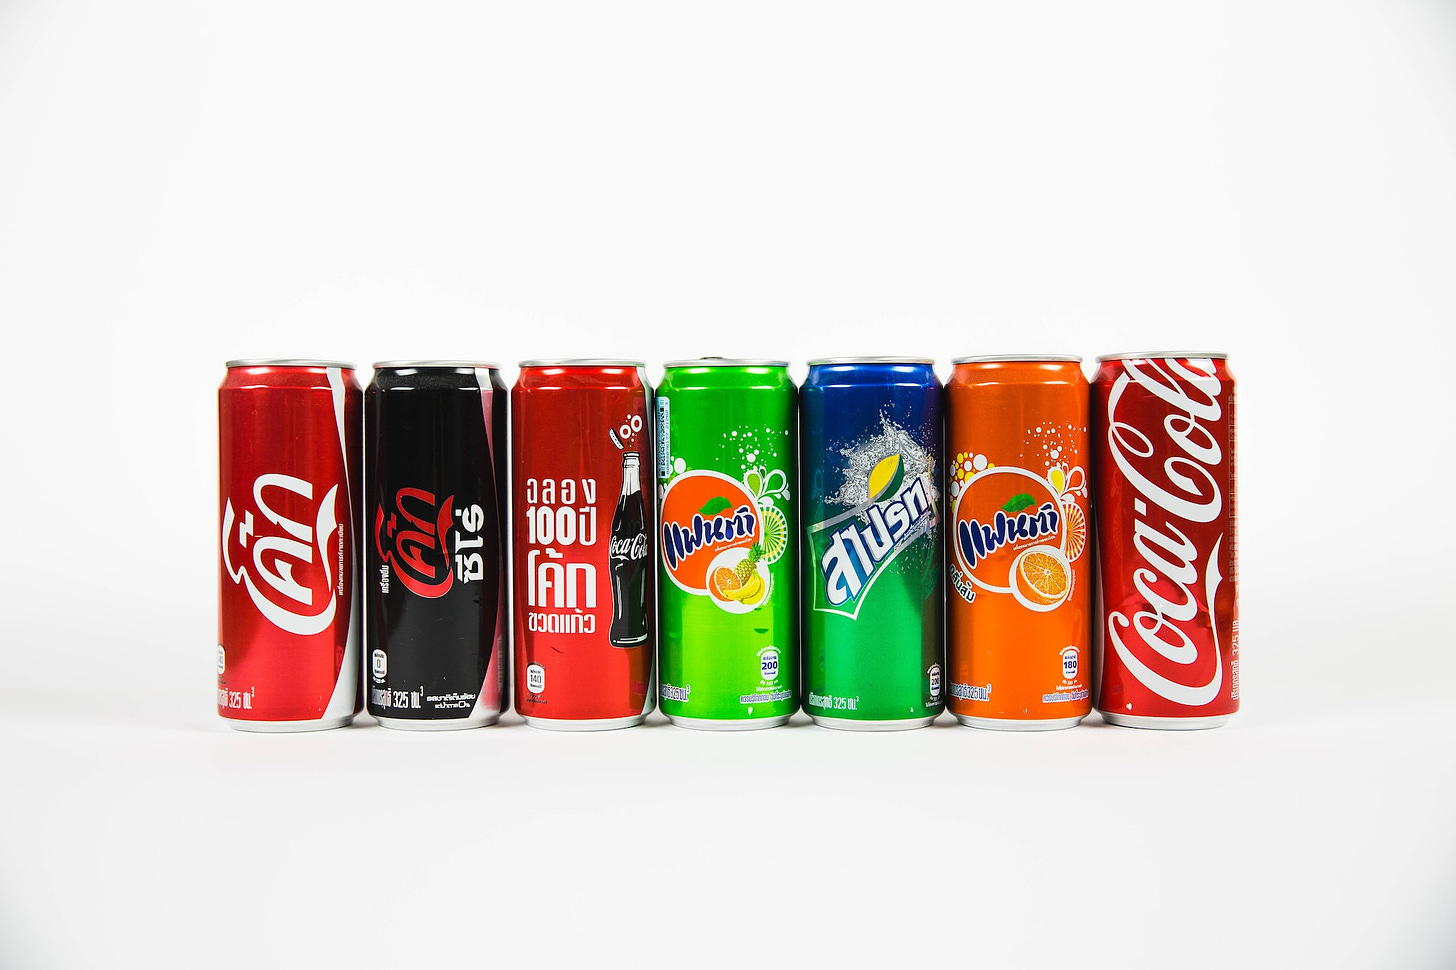 All the exciting RGM work at Coca-Cola is happening internationally